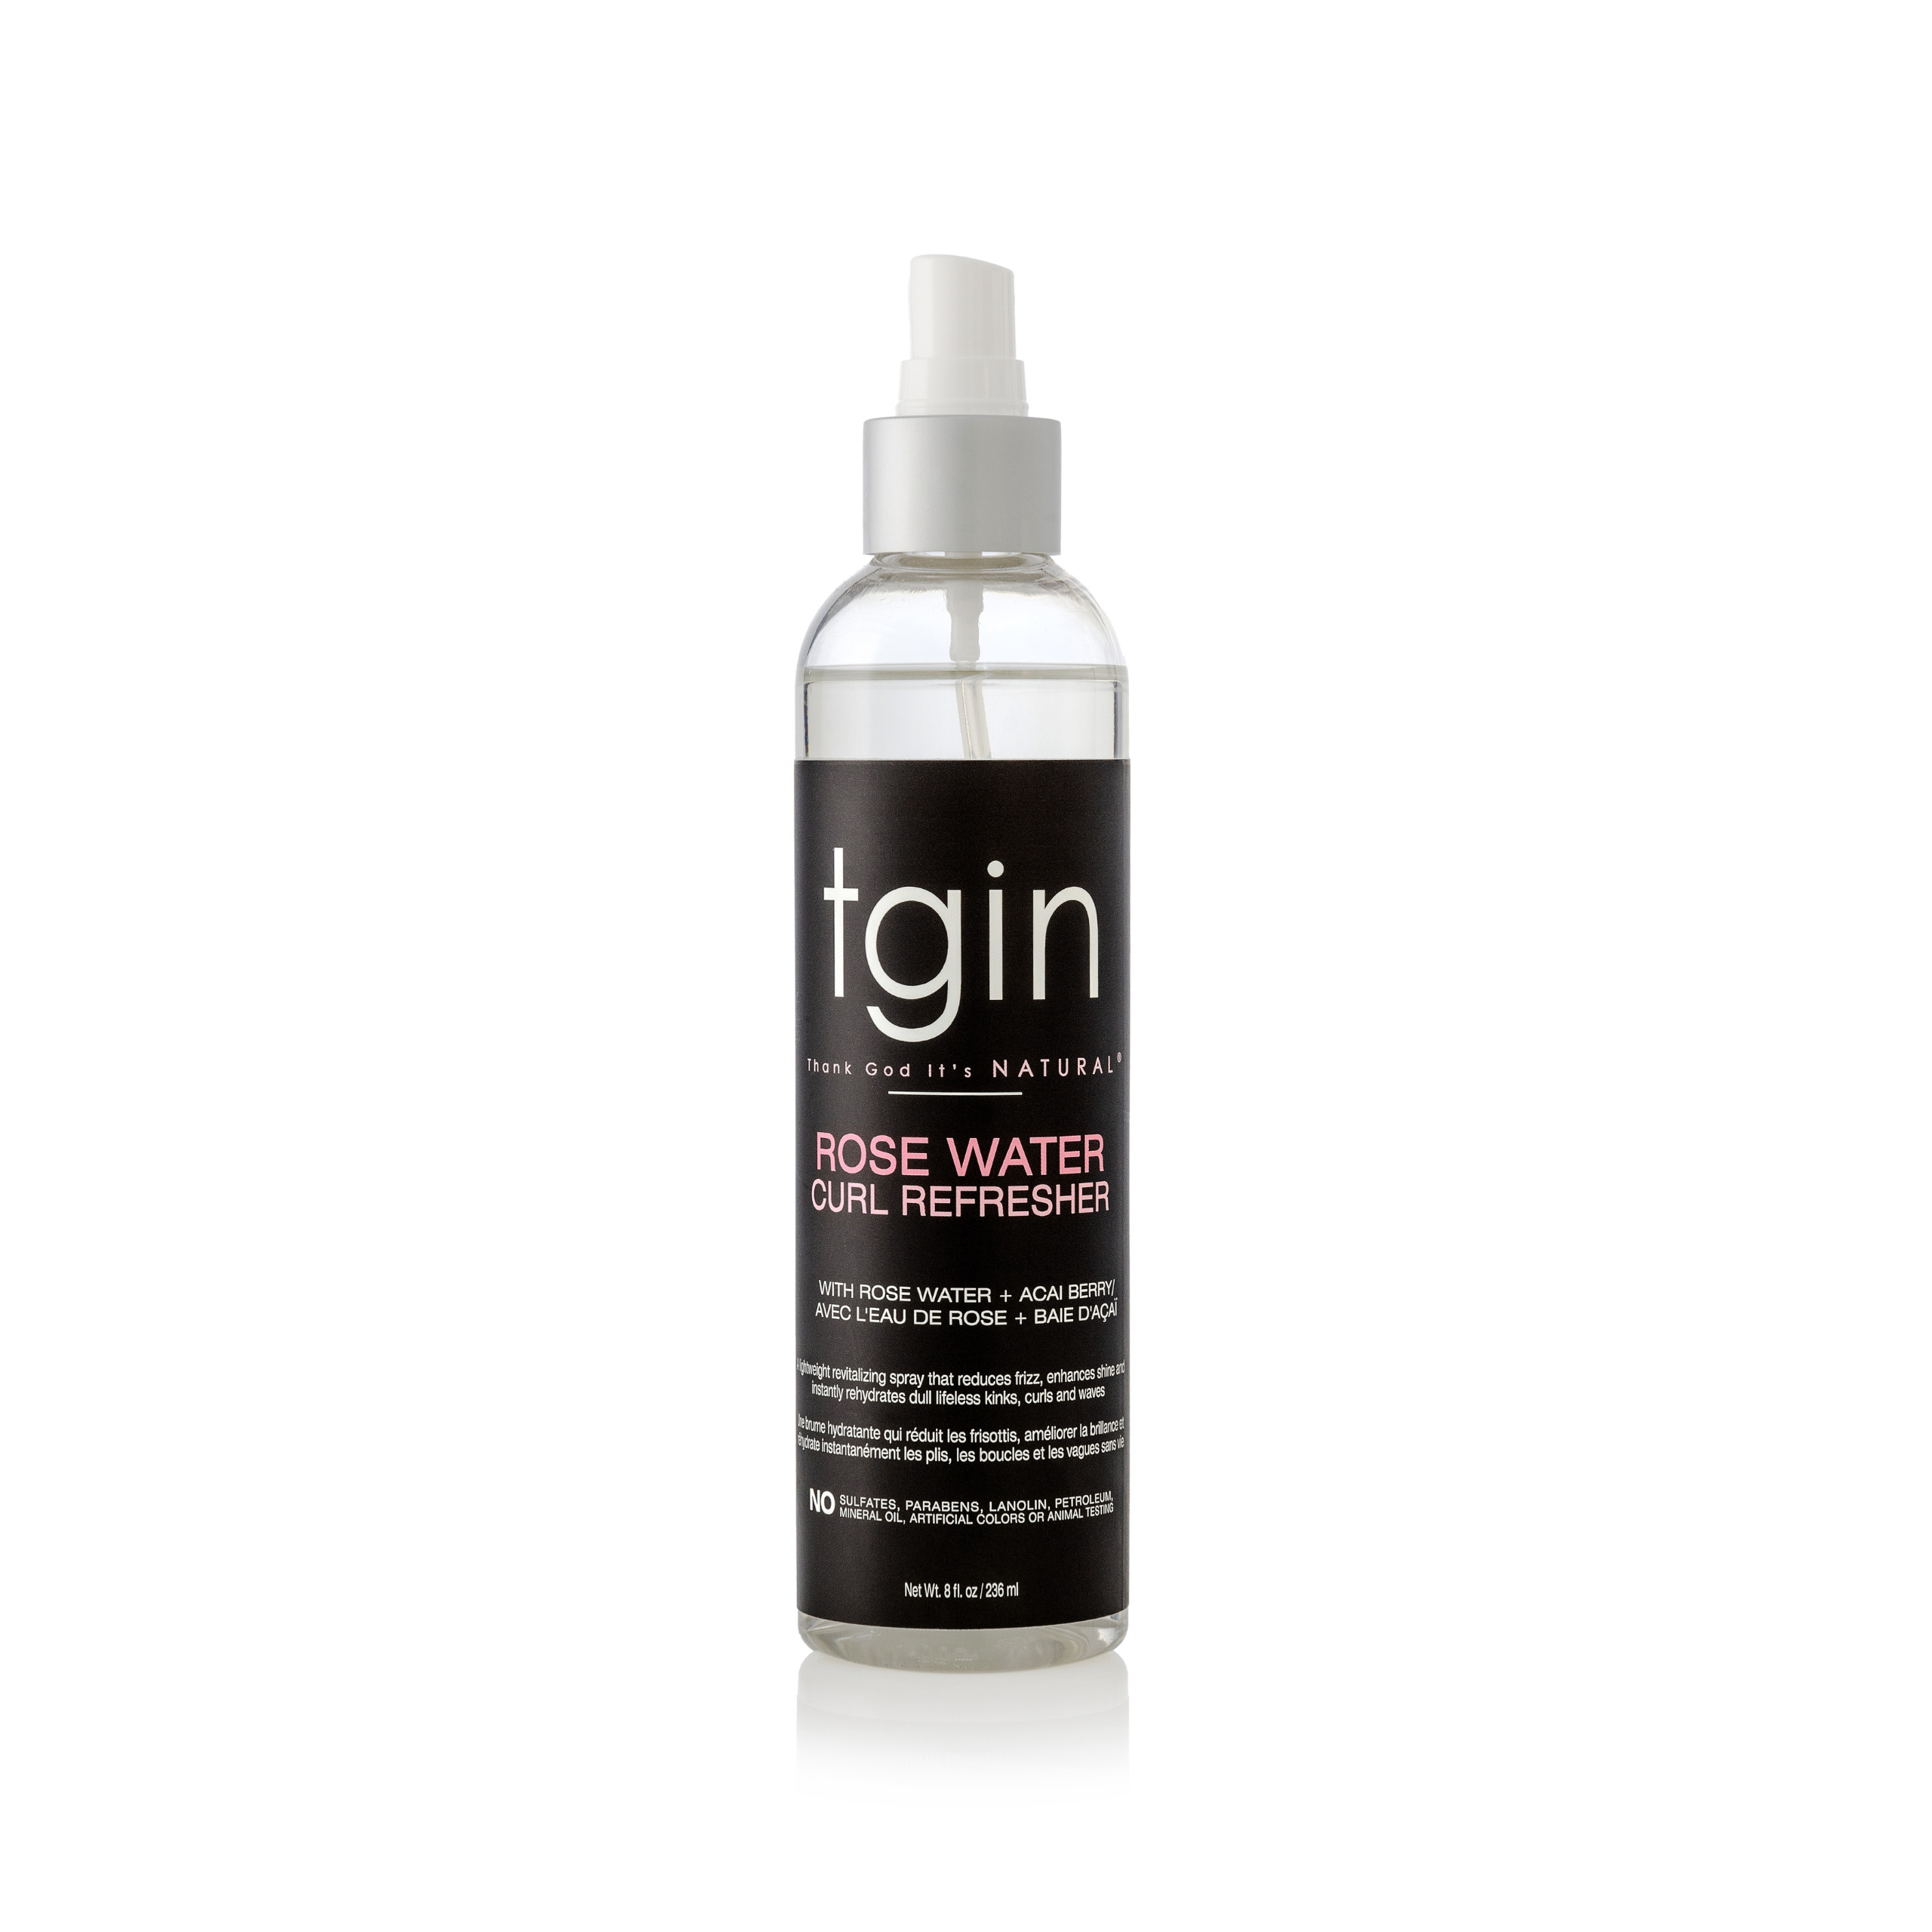 tgin Rose Water Curl Refresher for Curls - Natural Hair - Braids - Protective Styles - 8 Oz